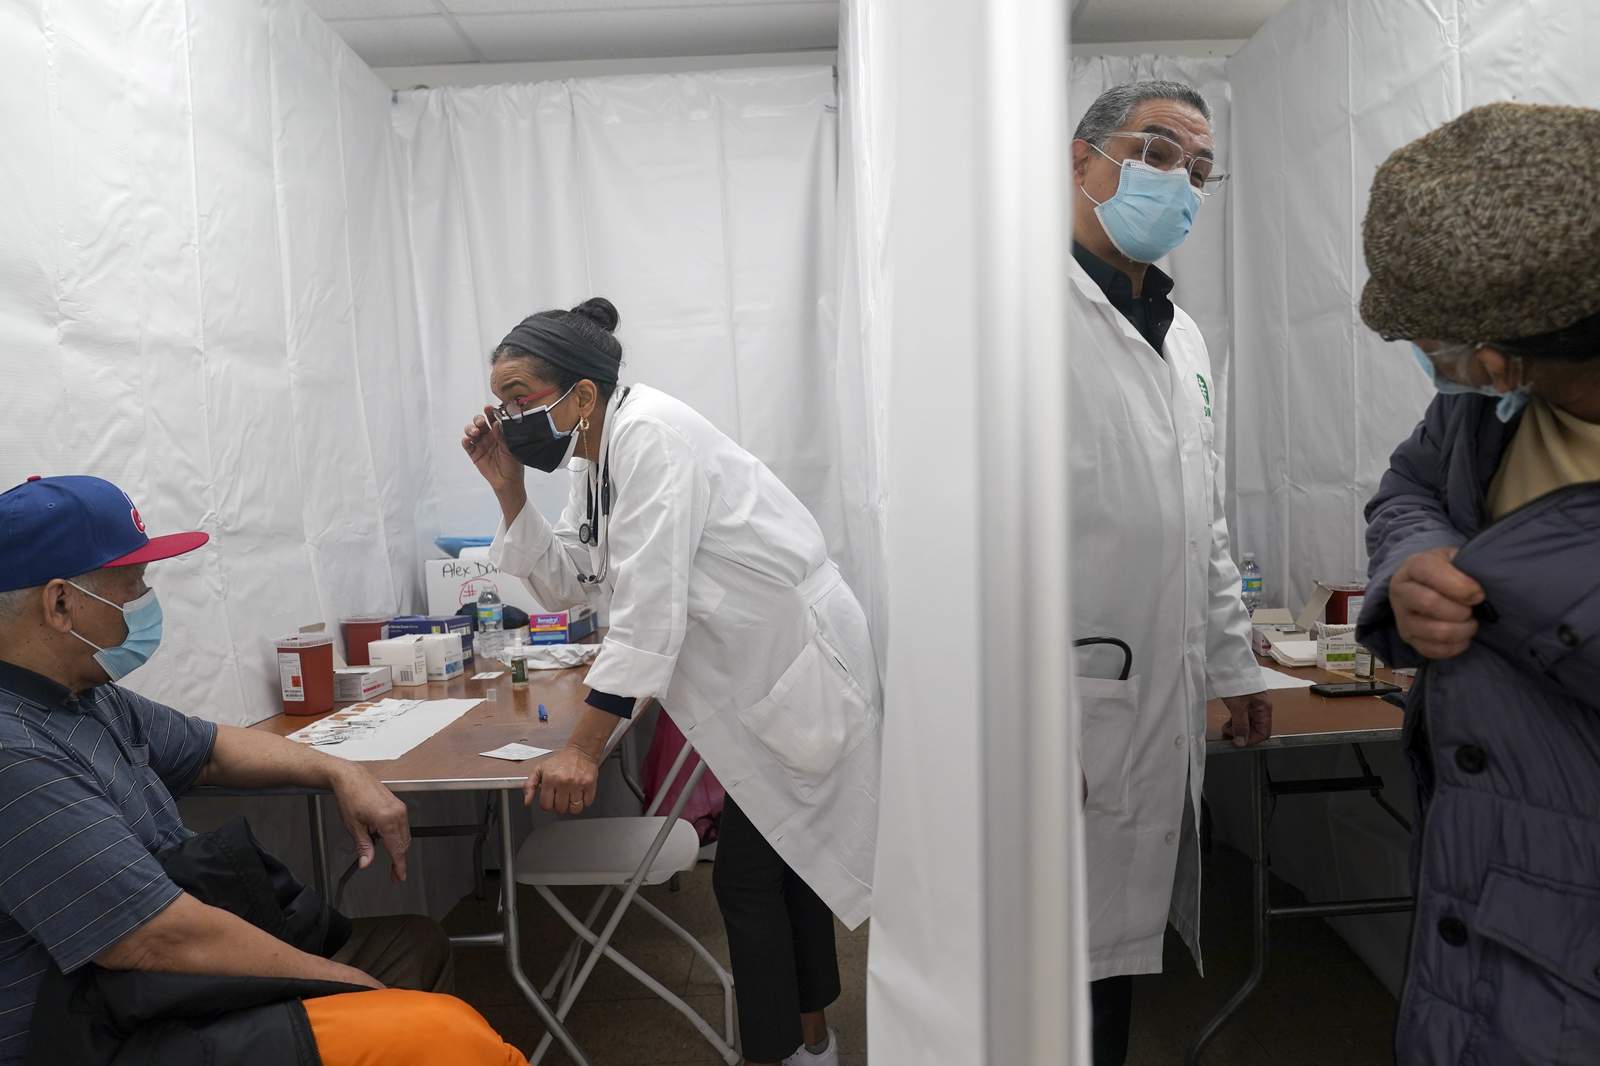 Latinos face barriers like fear, language in getting vaccine